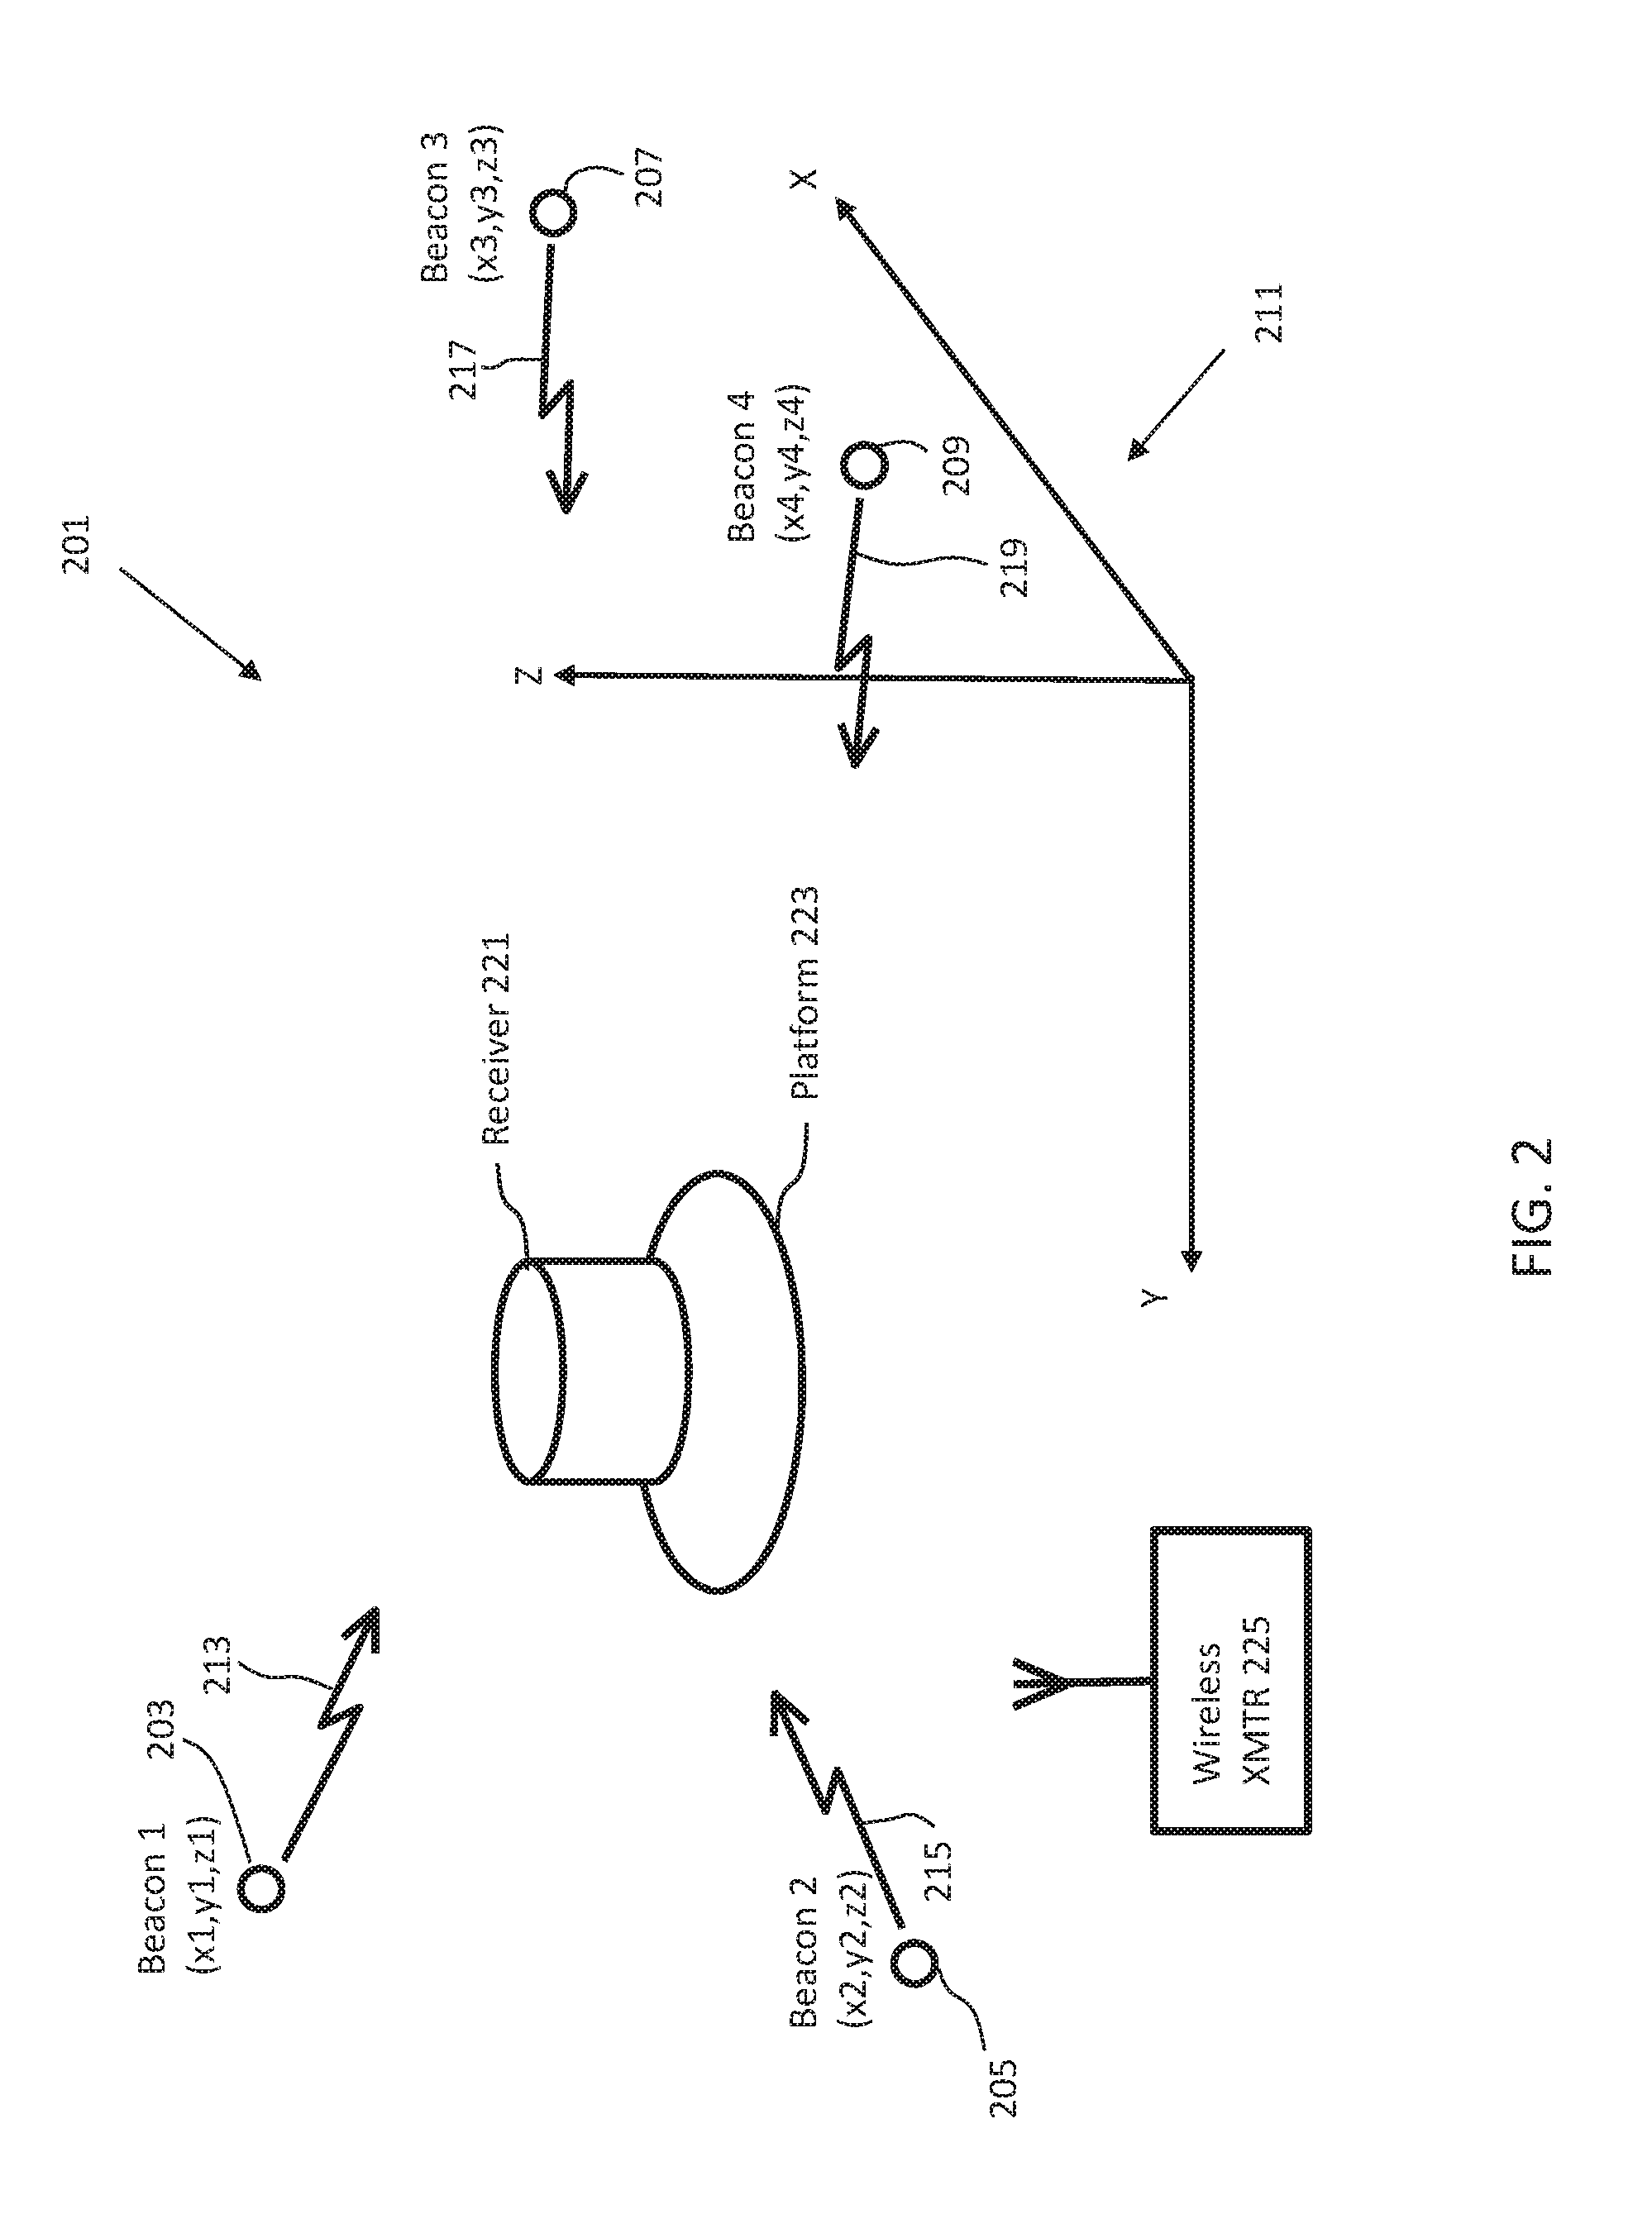 Localization method and apparatus